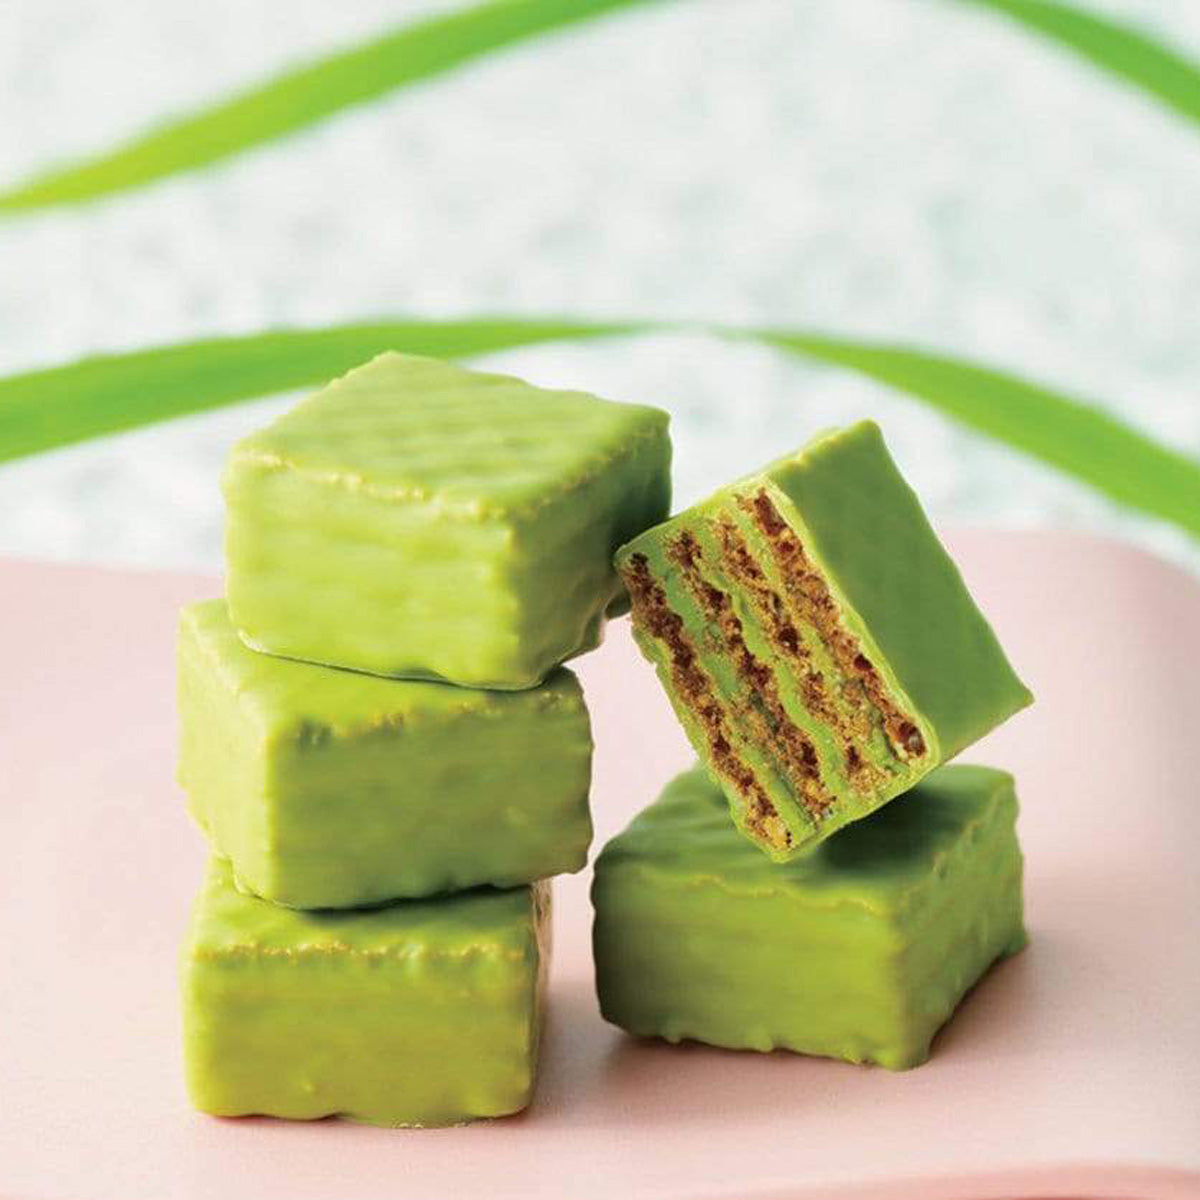 ROYCE' Chocolate - Chocolate Wafers "Matcha" - Image shows green chocolate wafers on a pink plate. Background is white with accents of green ribbons.